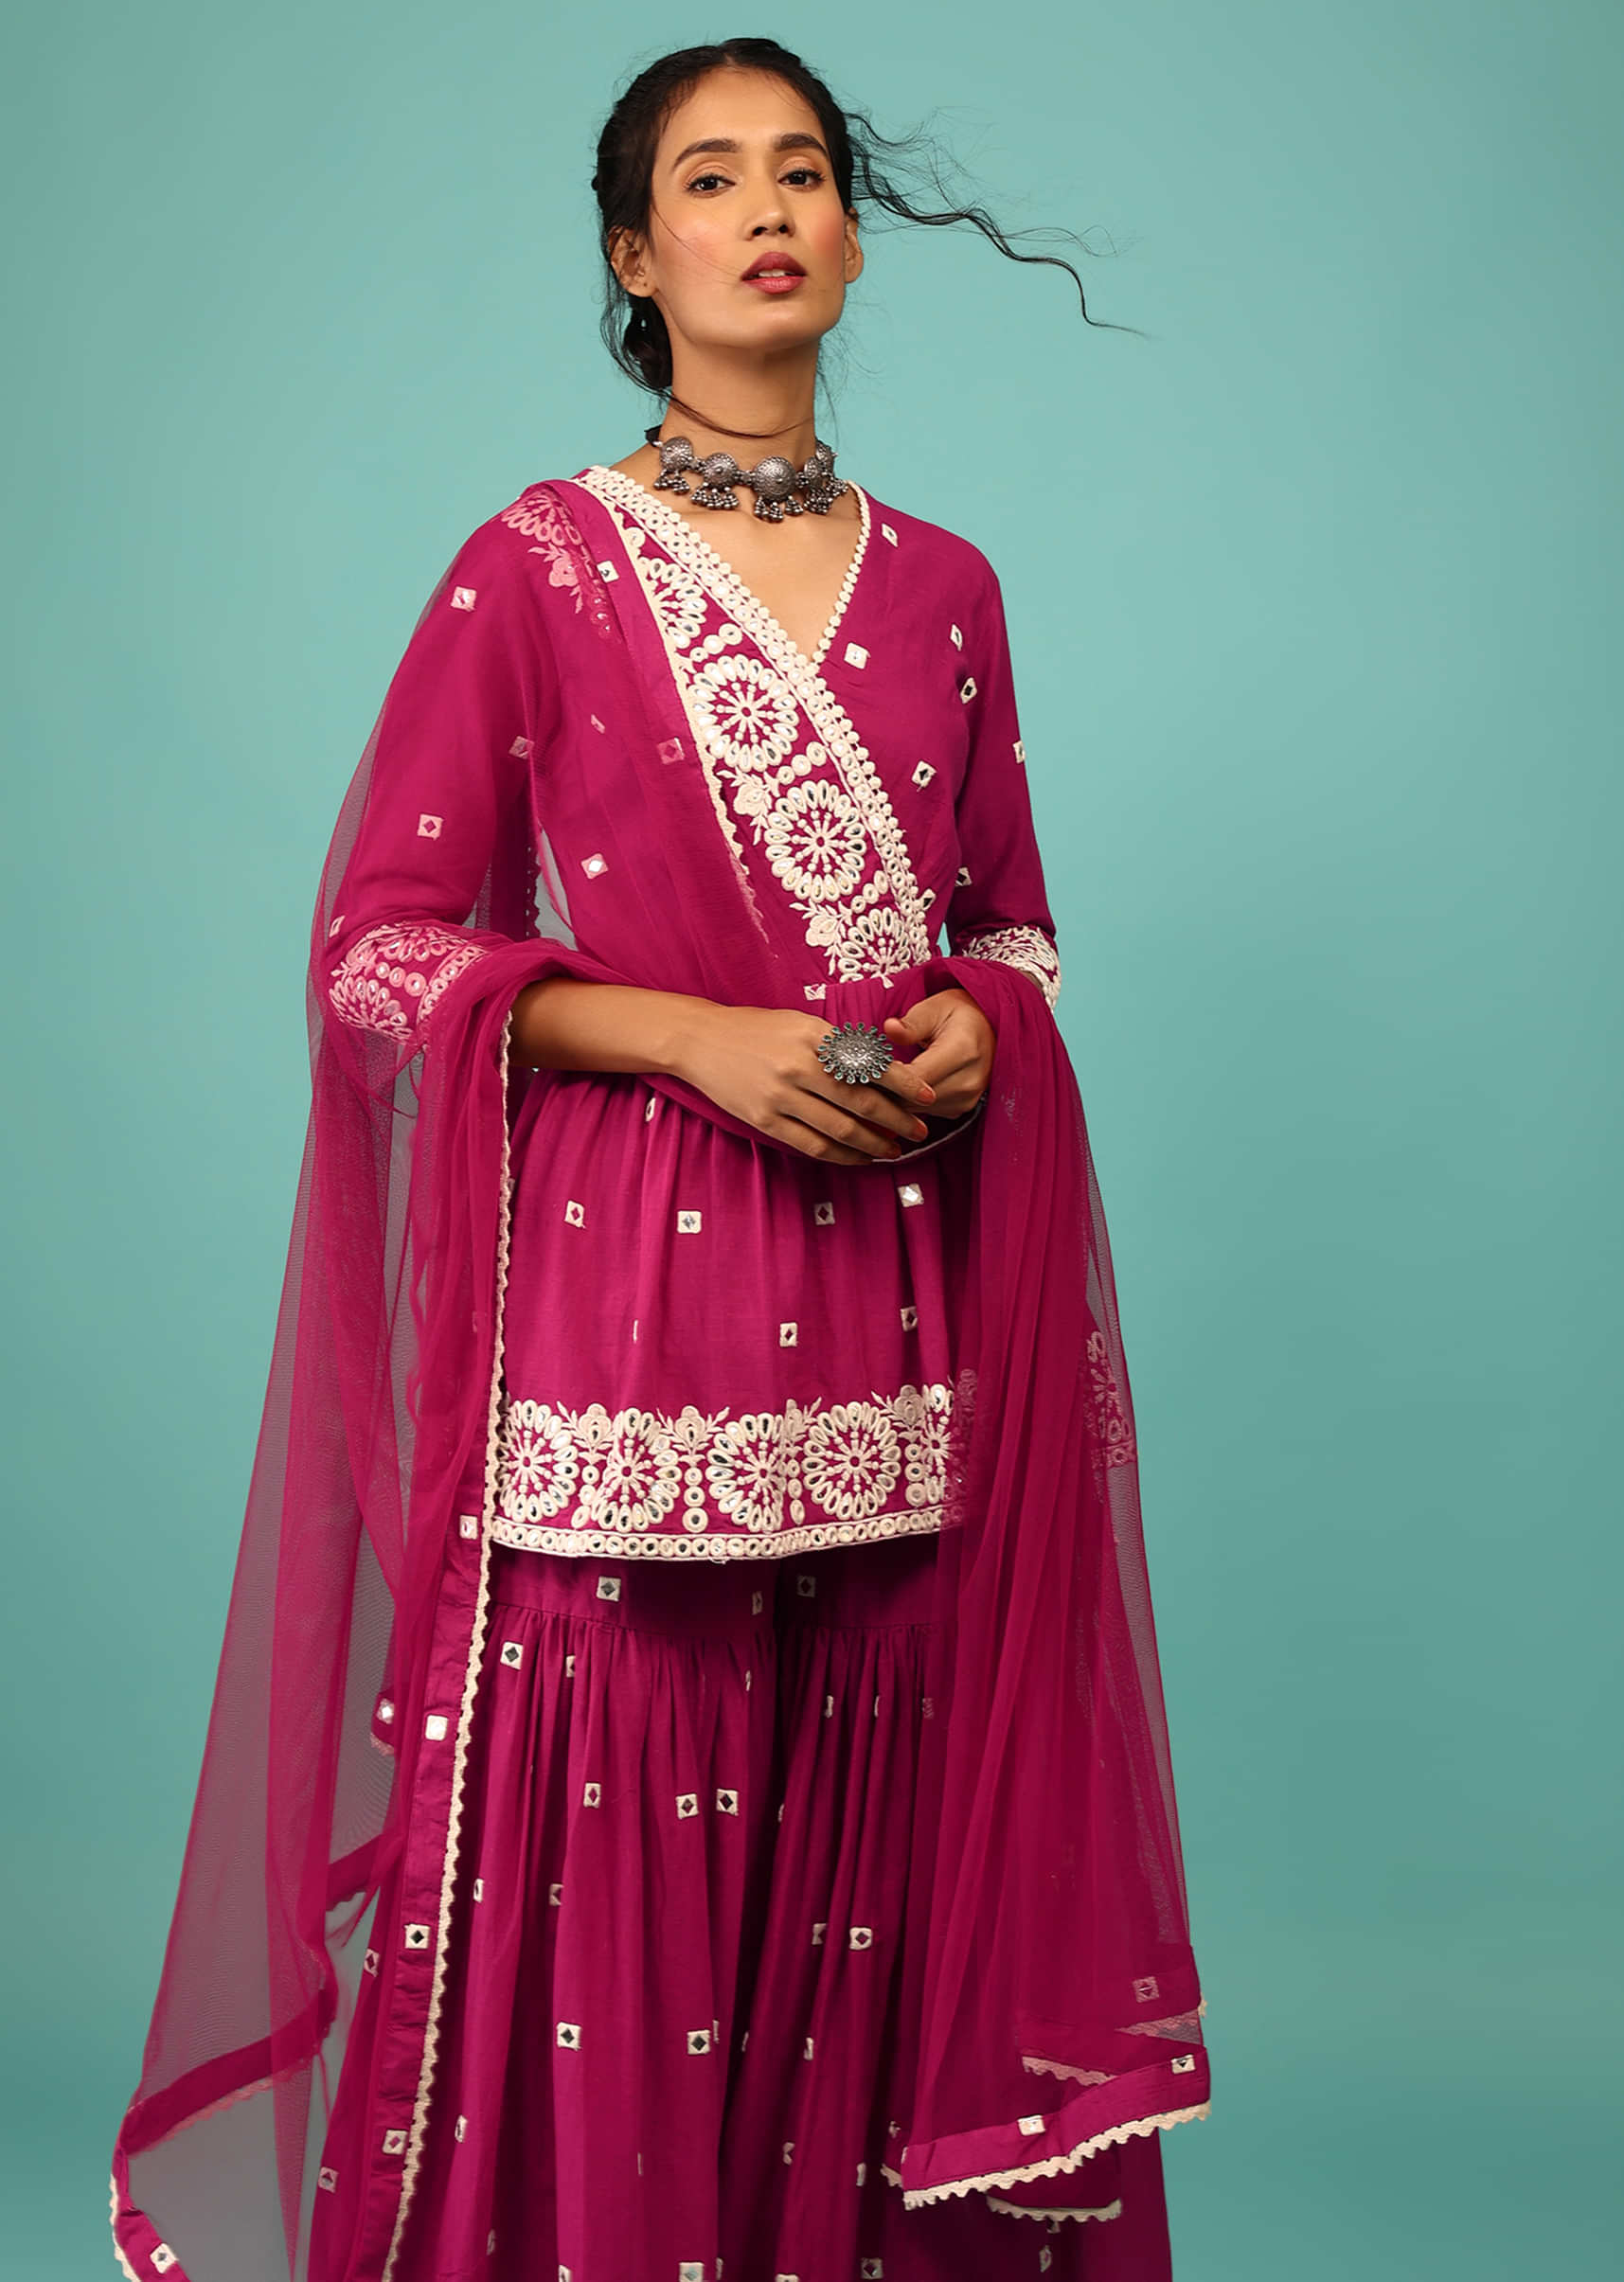 Magenta Pink Sharara Suit In Cotton With Lucknowi Floral Embroidery & Angarakha Peplum Top